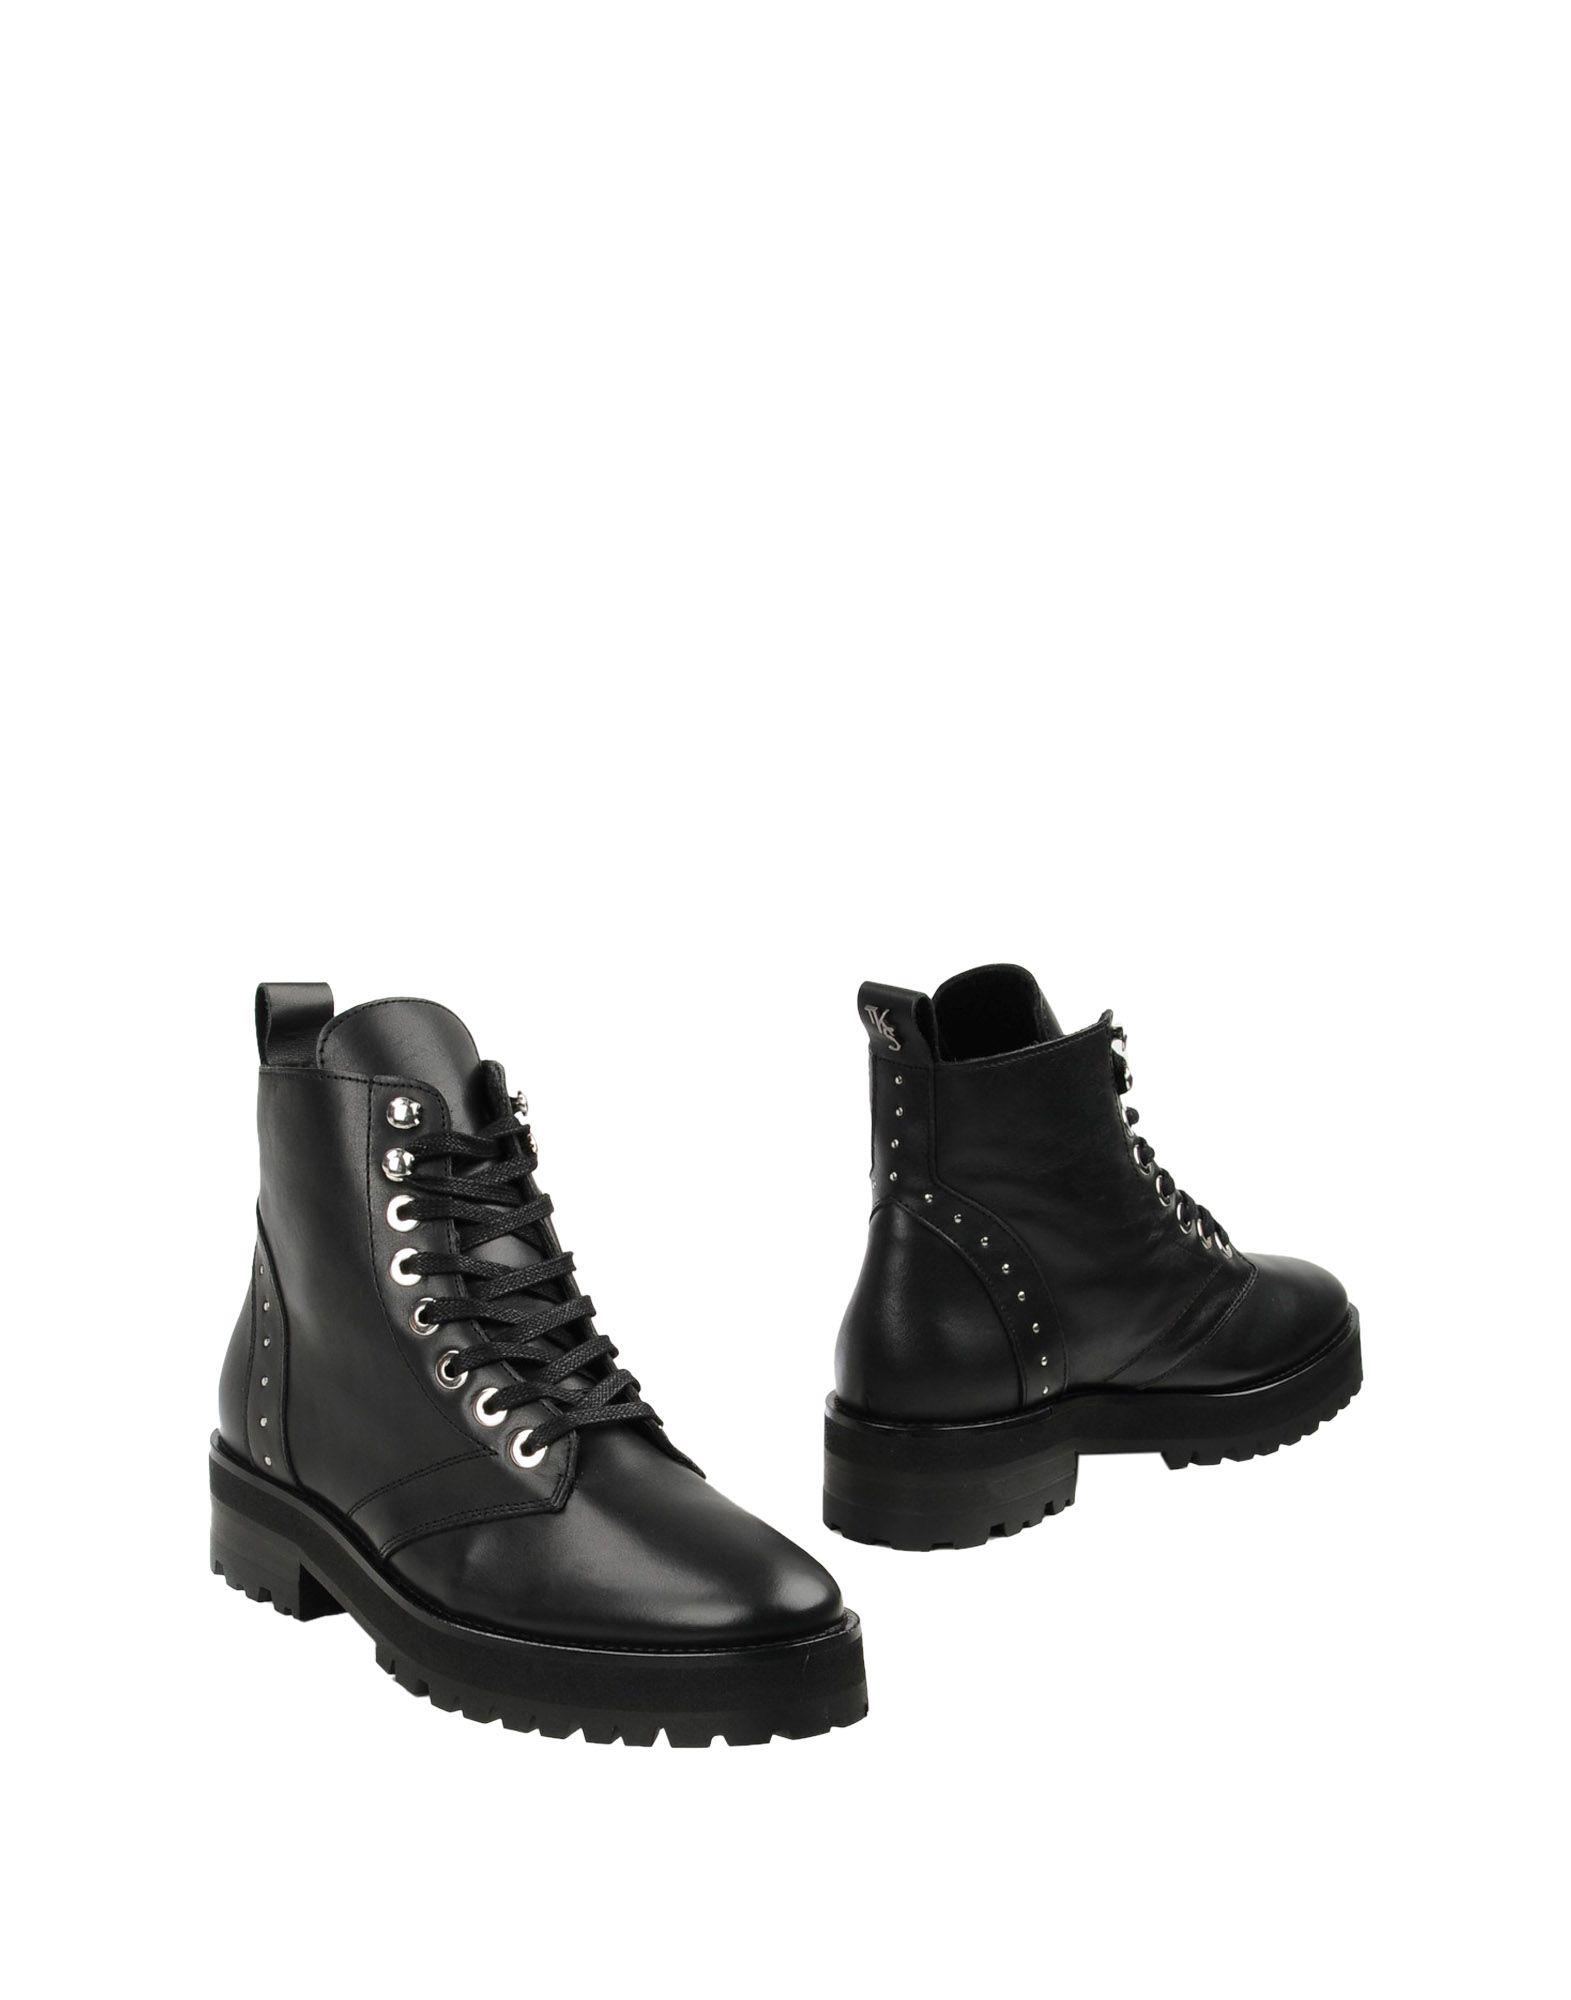 The Kooples Sport Leather Ankle Boots in Black - Lyst